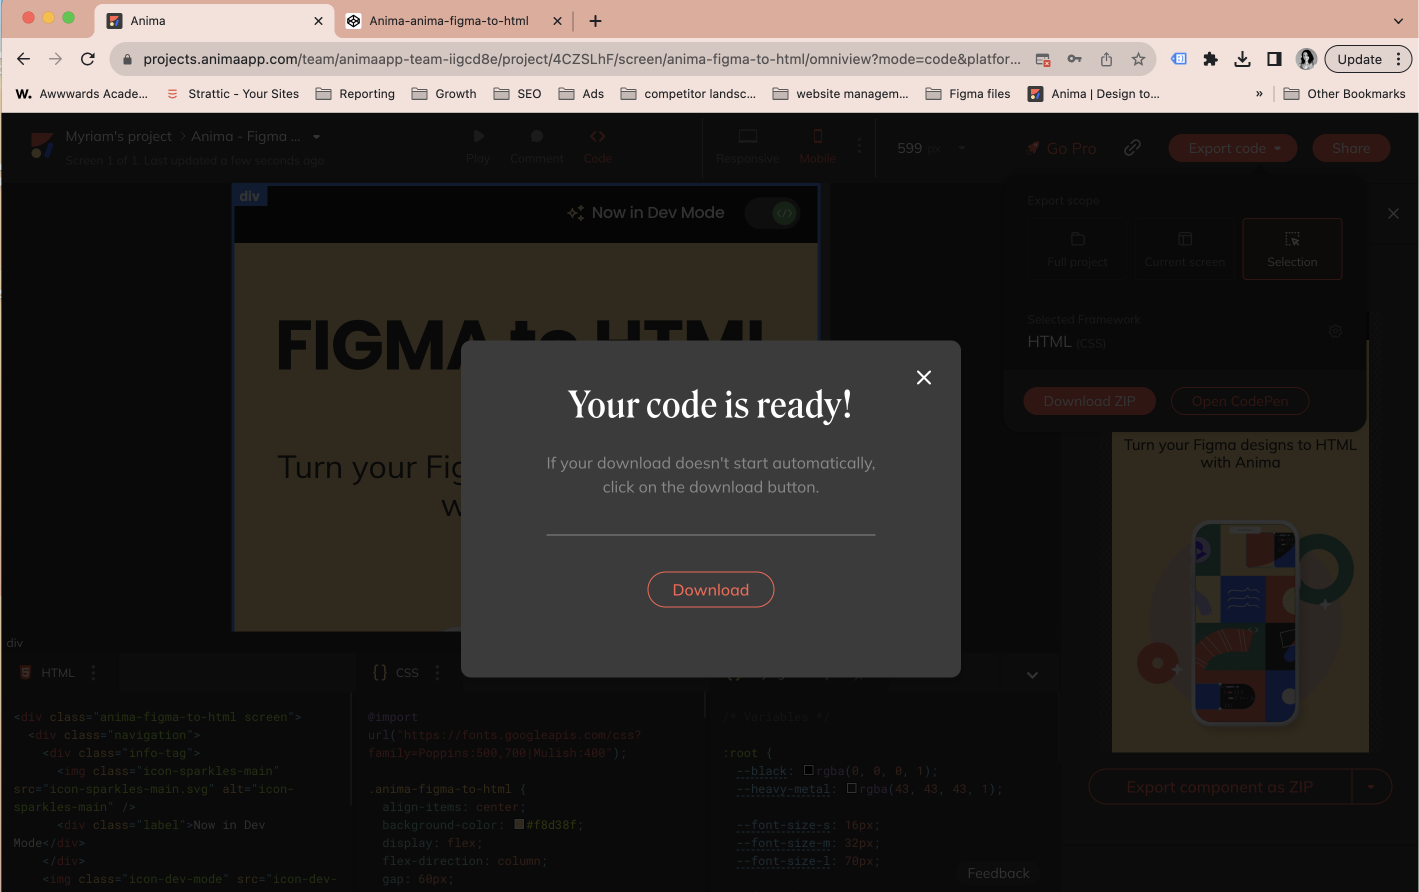 Anima's pop up "your code is ready"